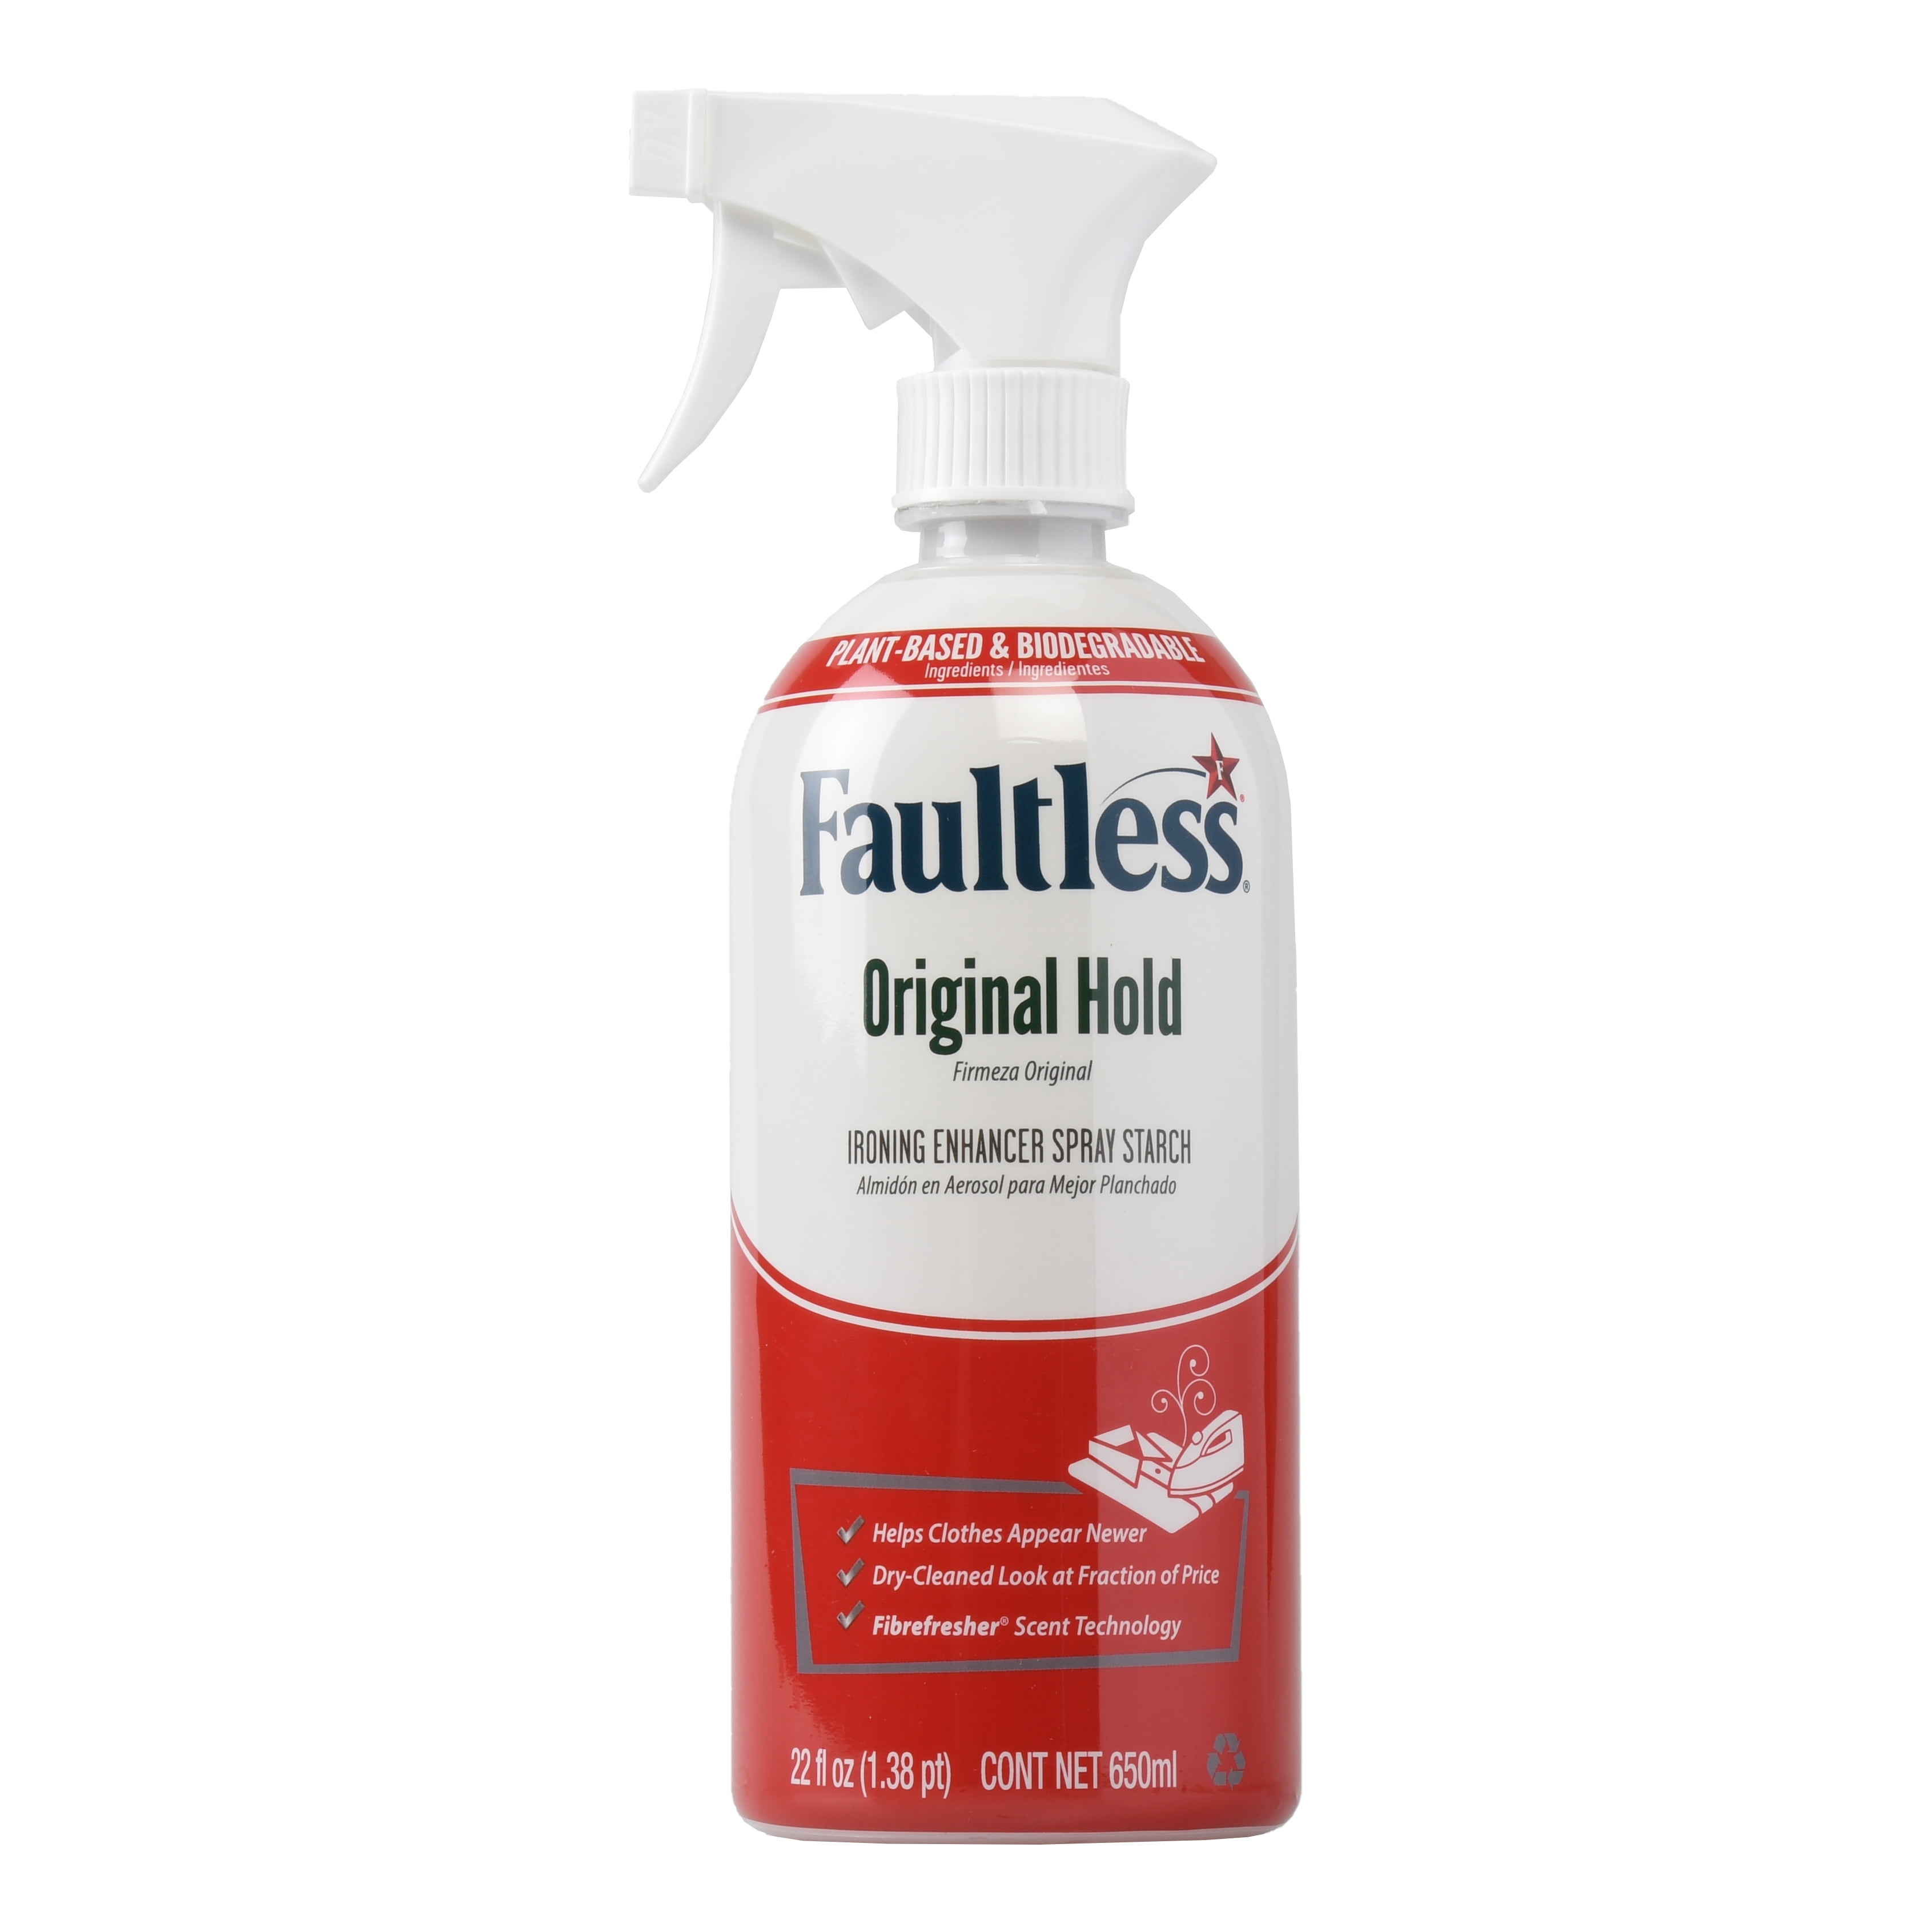 Faultless Original Fresh Scent Regular Starch Can - 20 oz - The Club Price